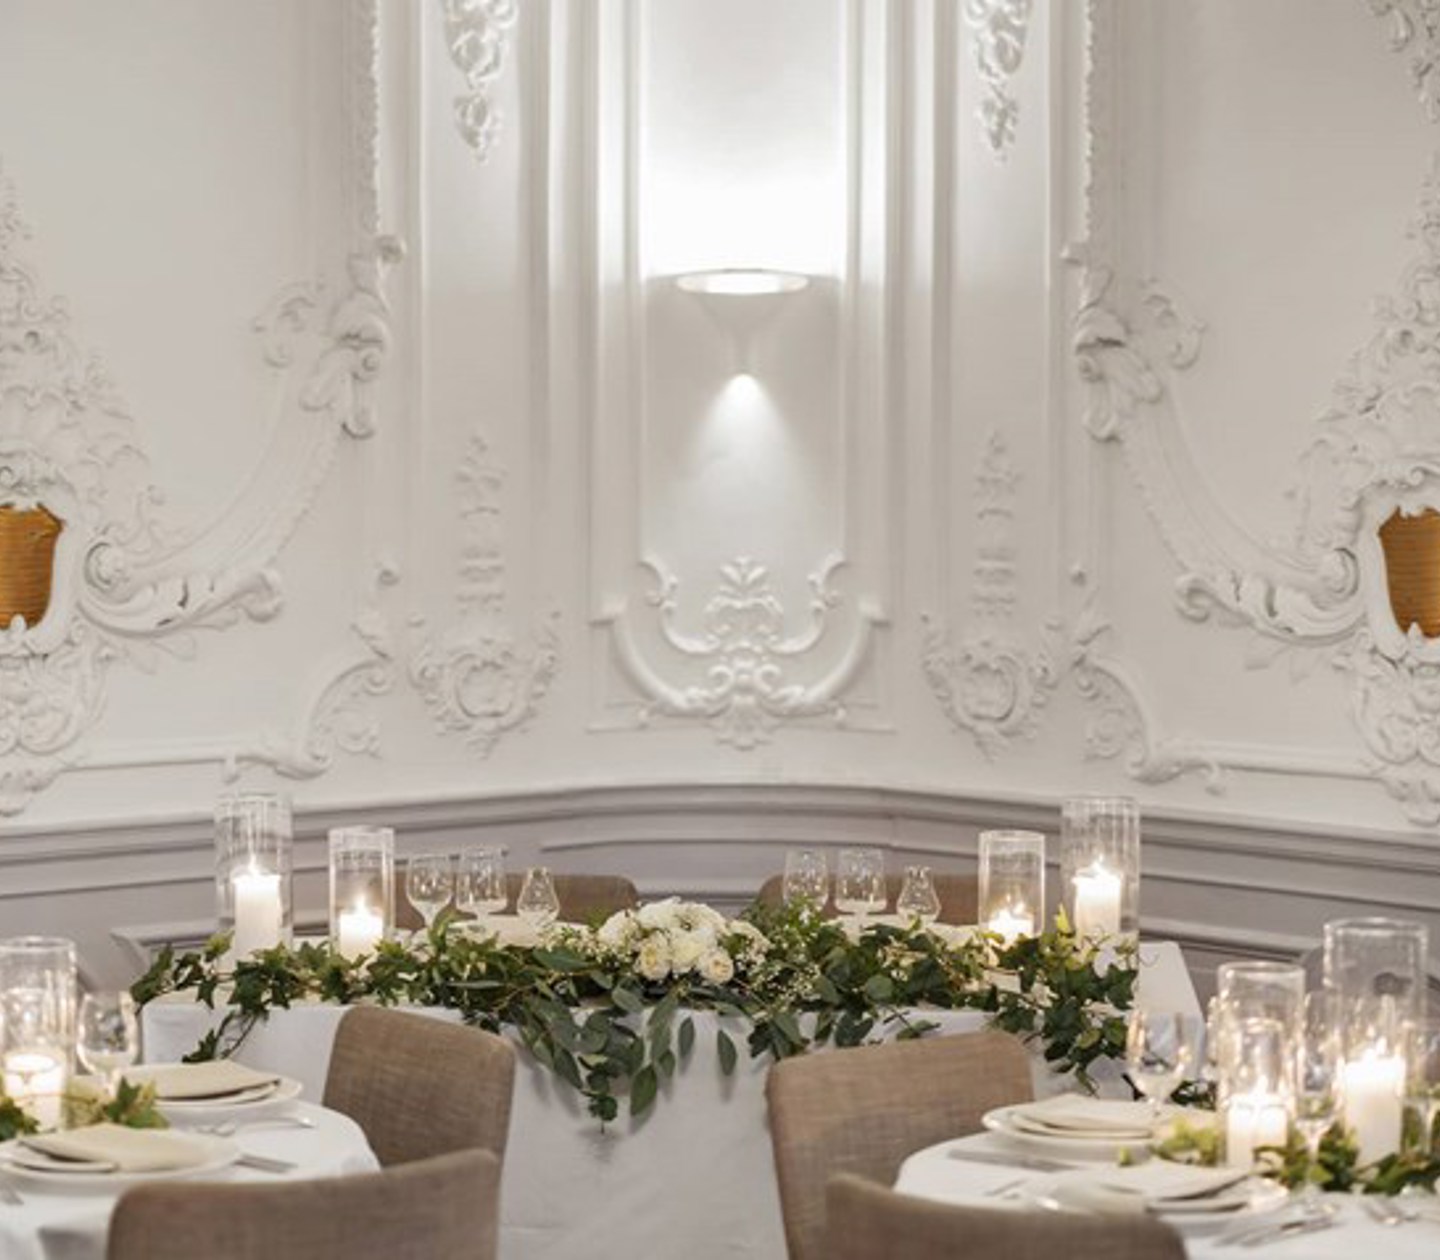 Fairytale dining room with stucco on white walls